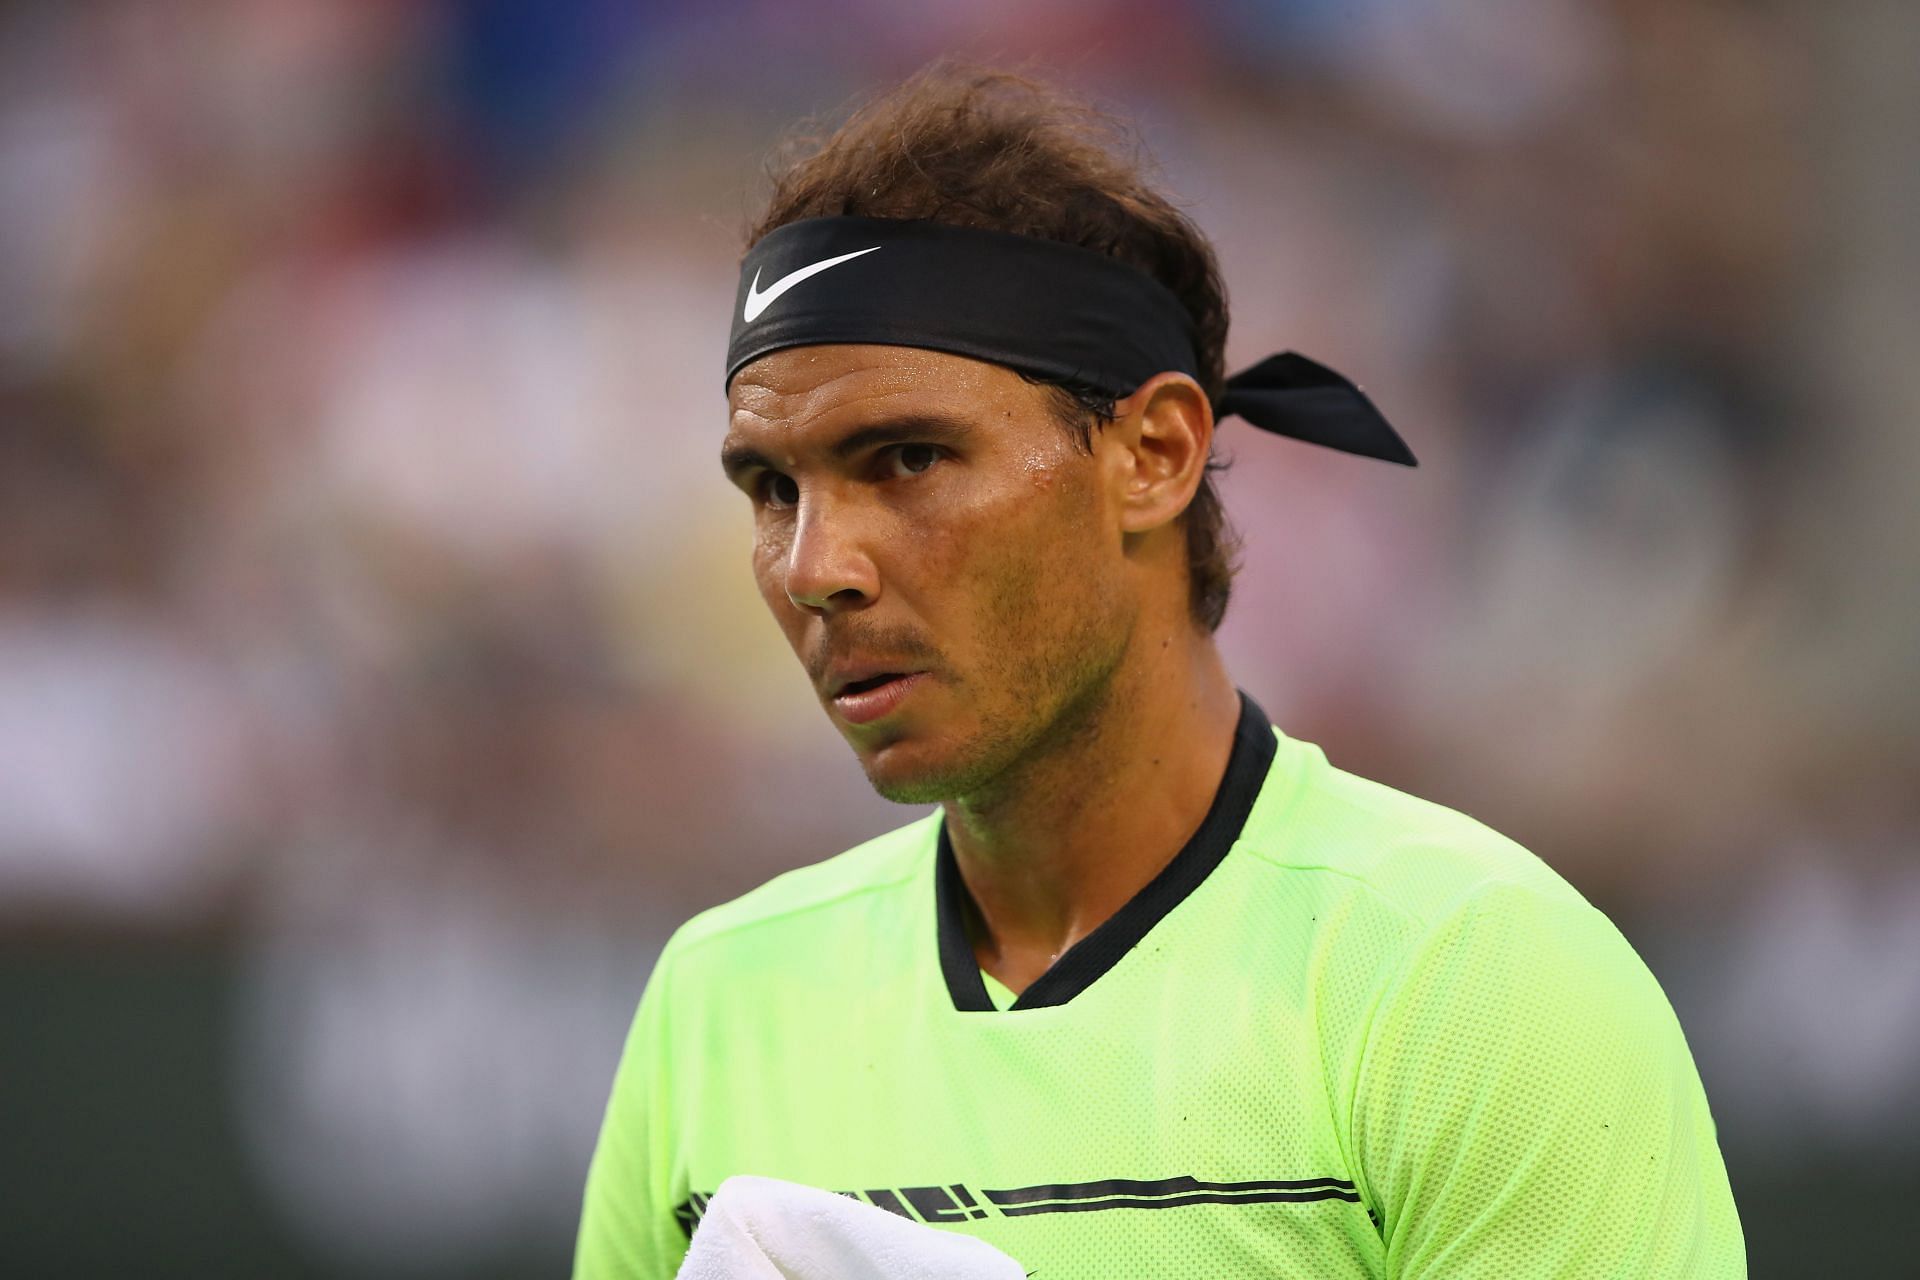 The 21-time Grand Slam champion will look to win his fourth title at Indian Wells come March